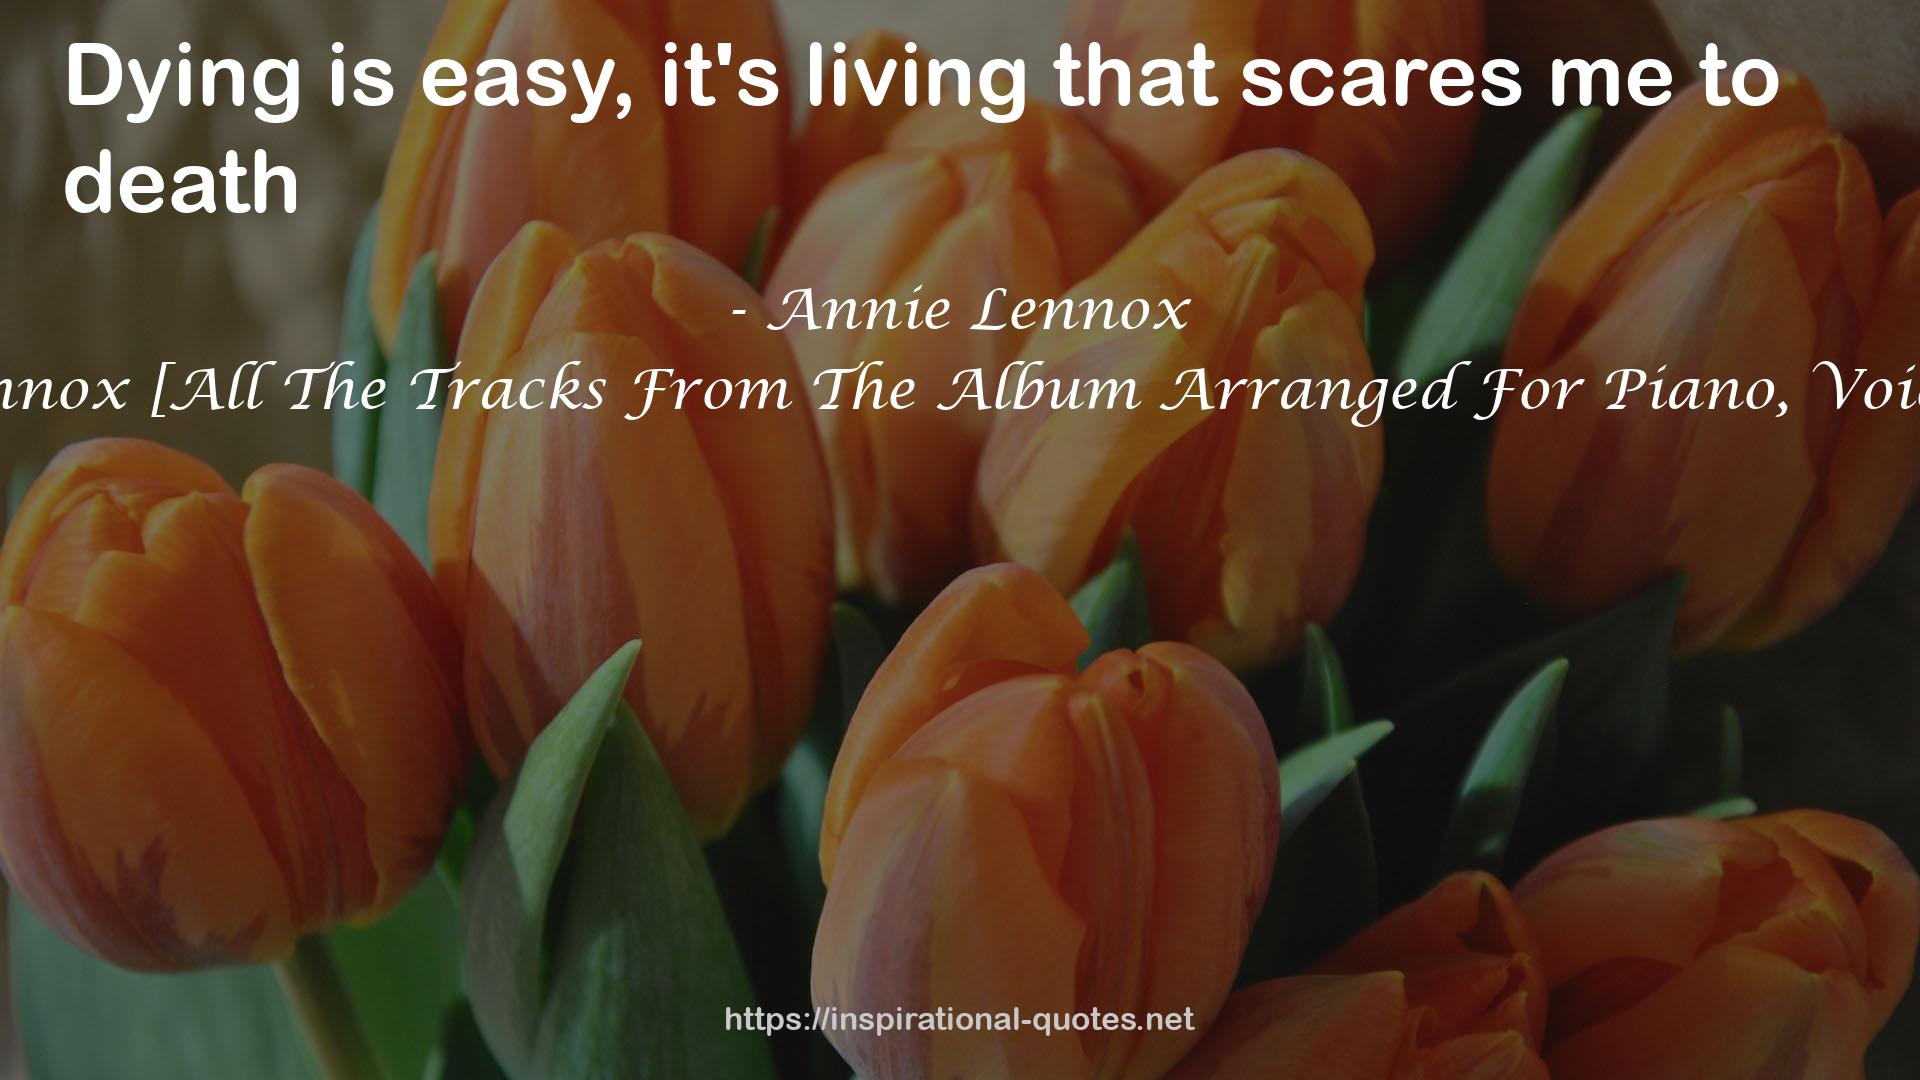 Diva   Annie Lennox [All The Tracks From The Album Arranged For Piano, Voice & Guitar] QUOTES